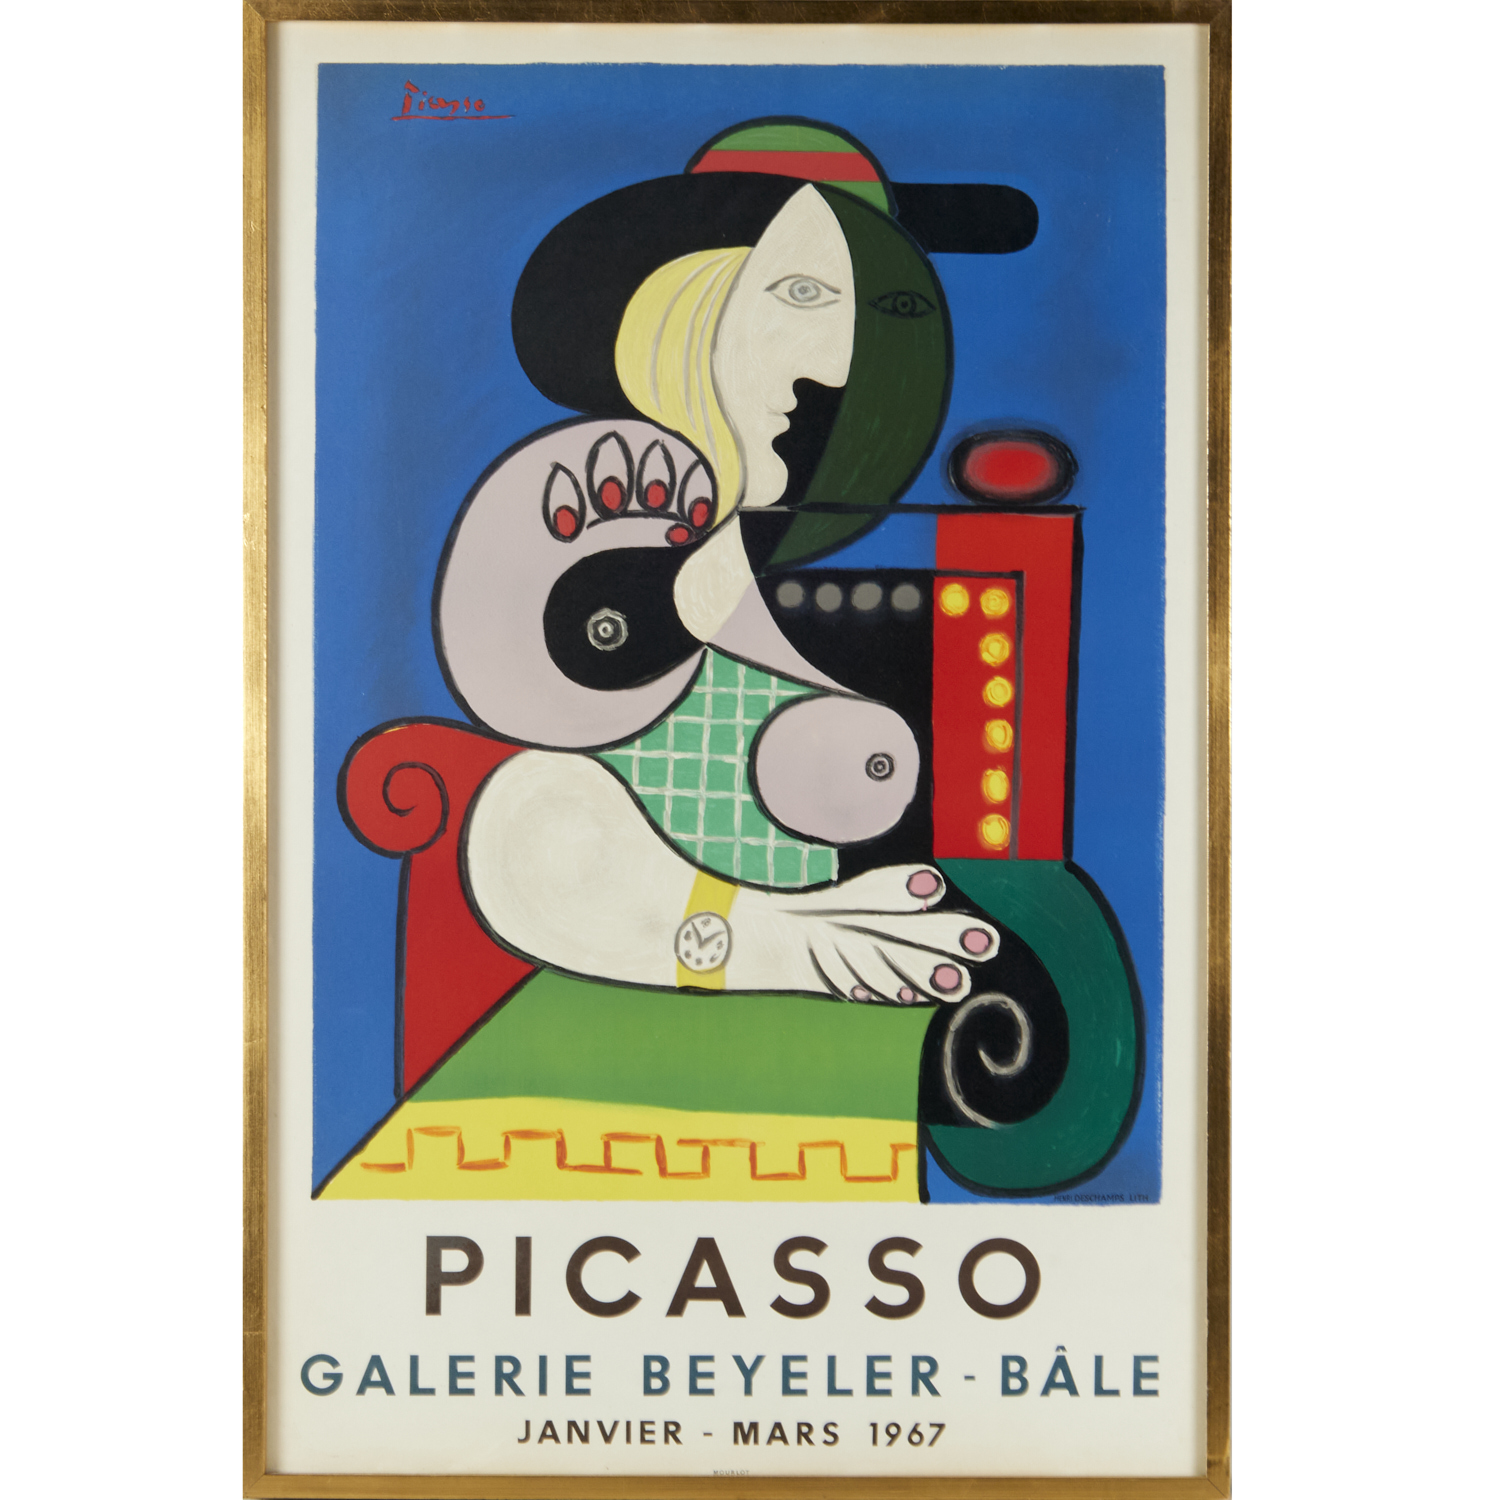 PABLO PICASSO, LITHOGRAPHIC POSTER,